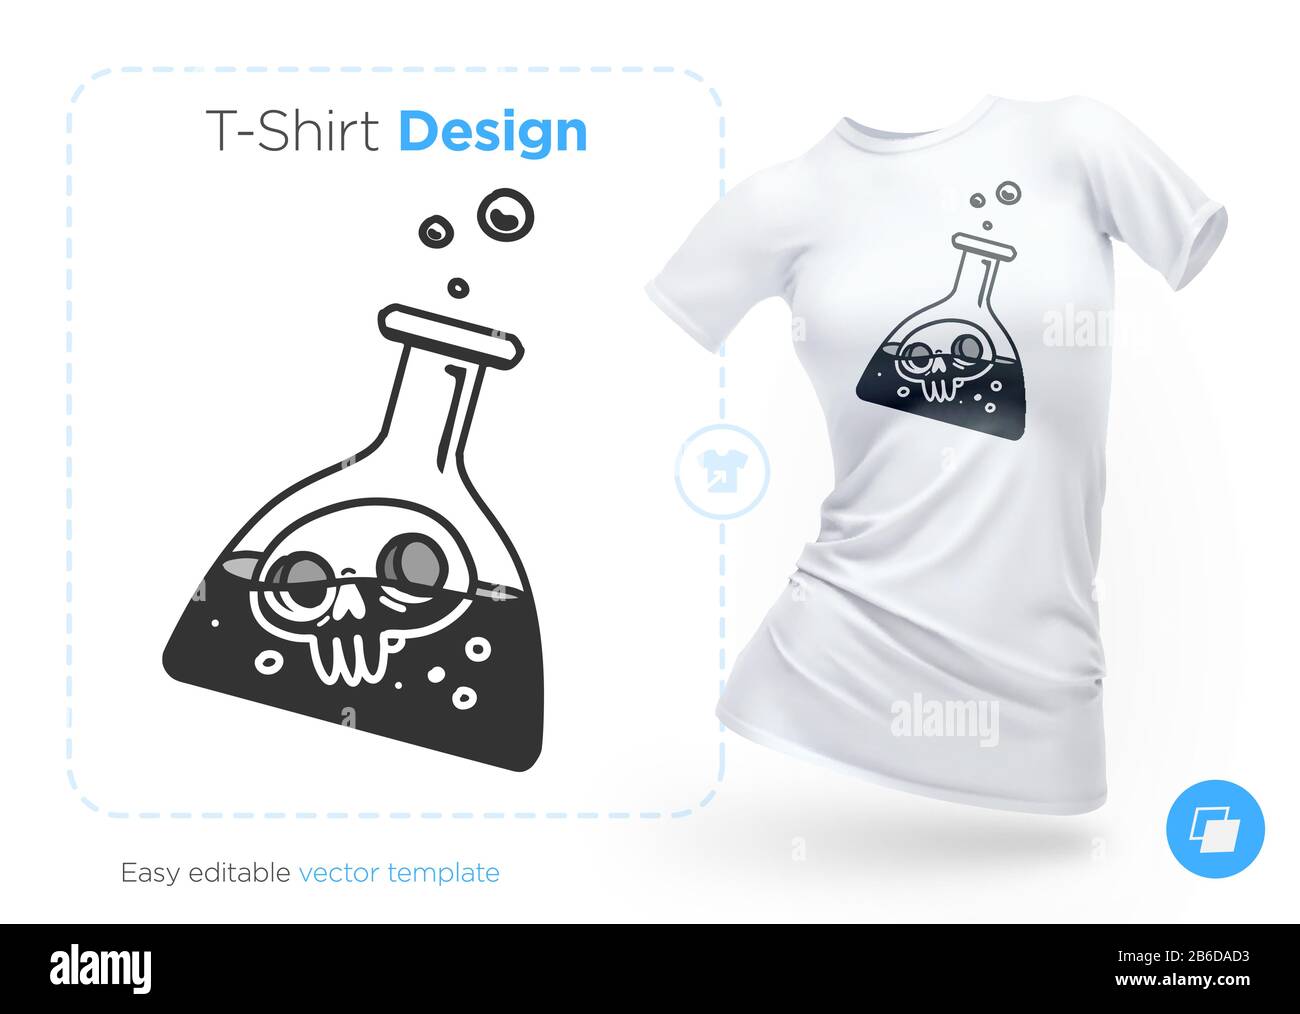 Skull in vitro t-shirt design. Print for clothes, posters or souvenirs. Vector Stock Vector